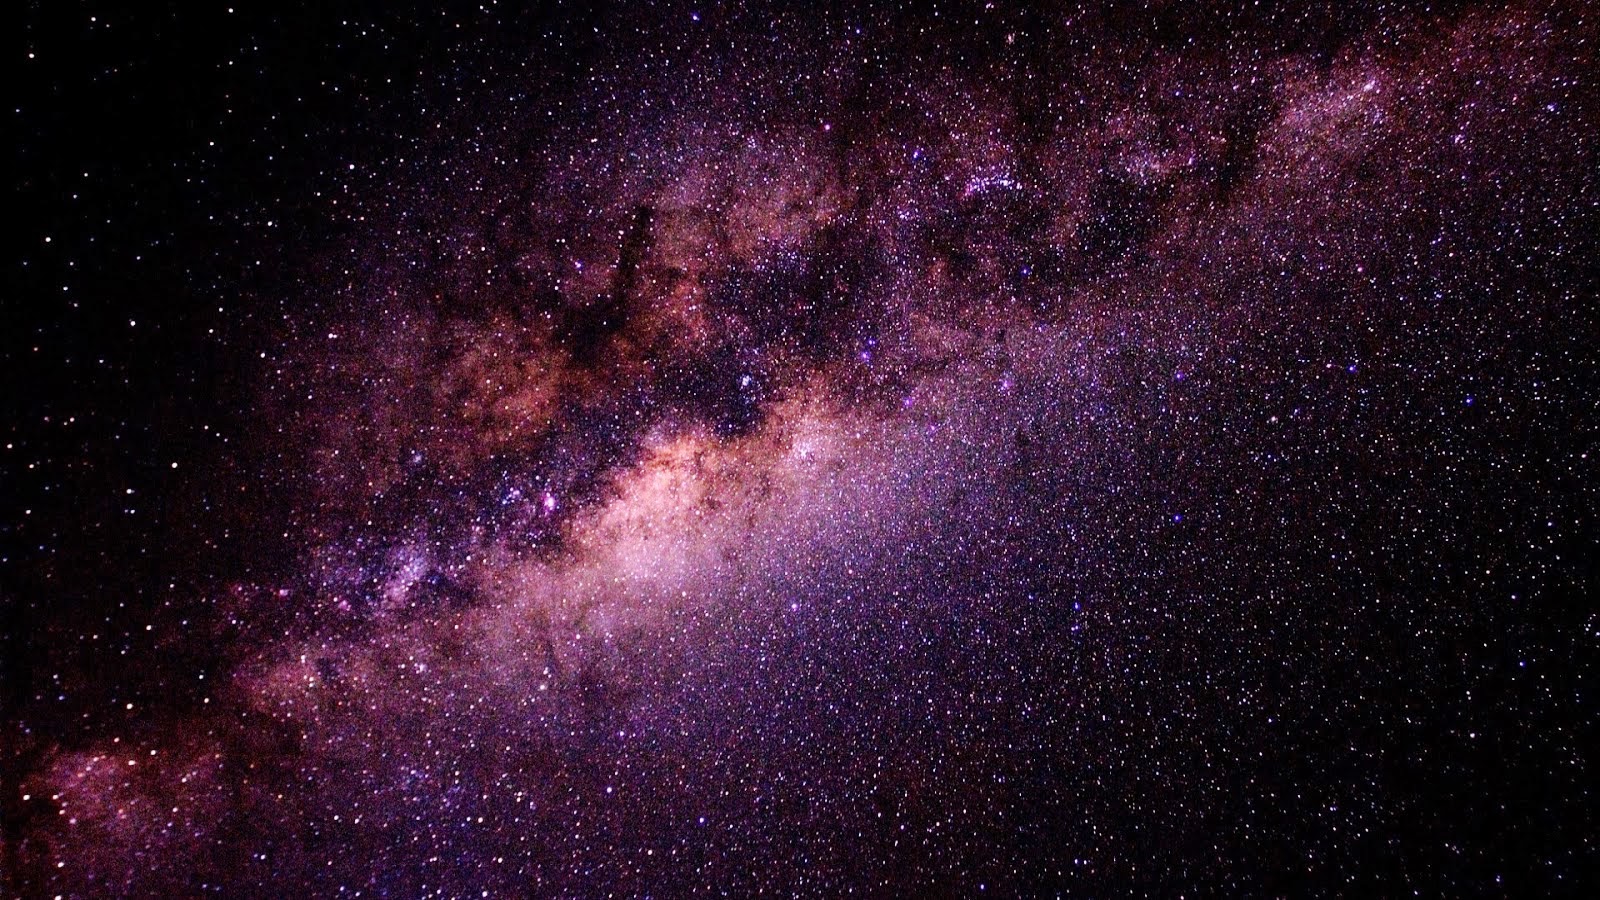 hd wallpapers 1080p space milky way galaxy hd wallpapers 1080p